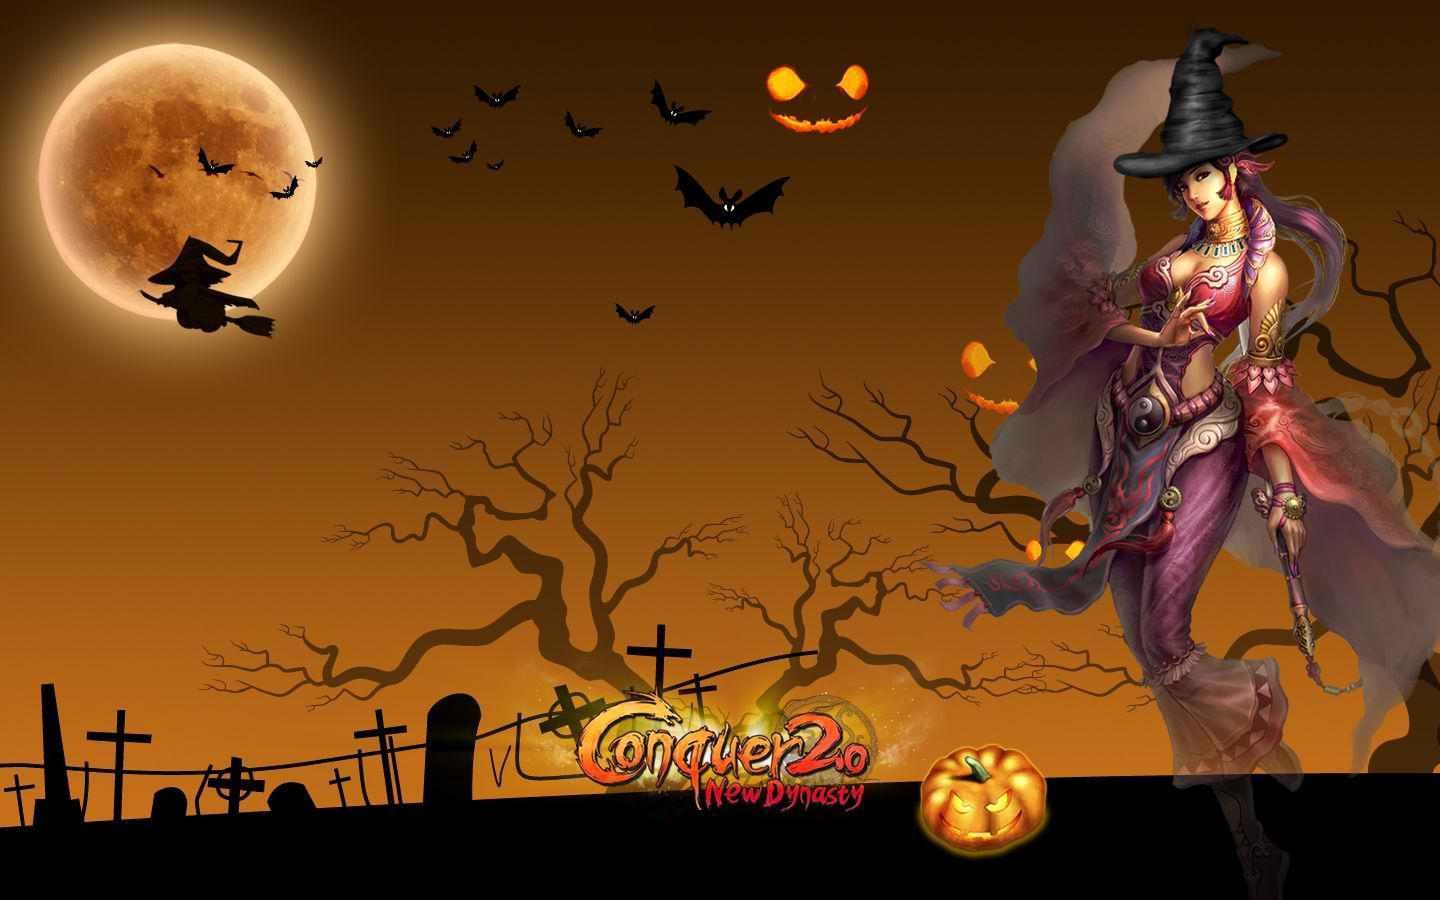 Witch Wallpaper Images  Free Download on Freepik